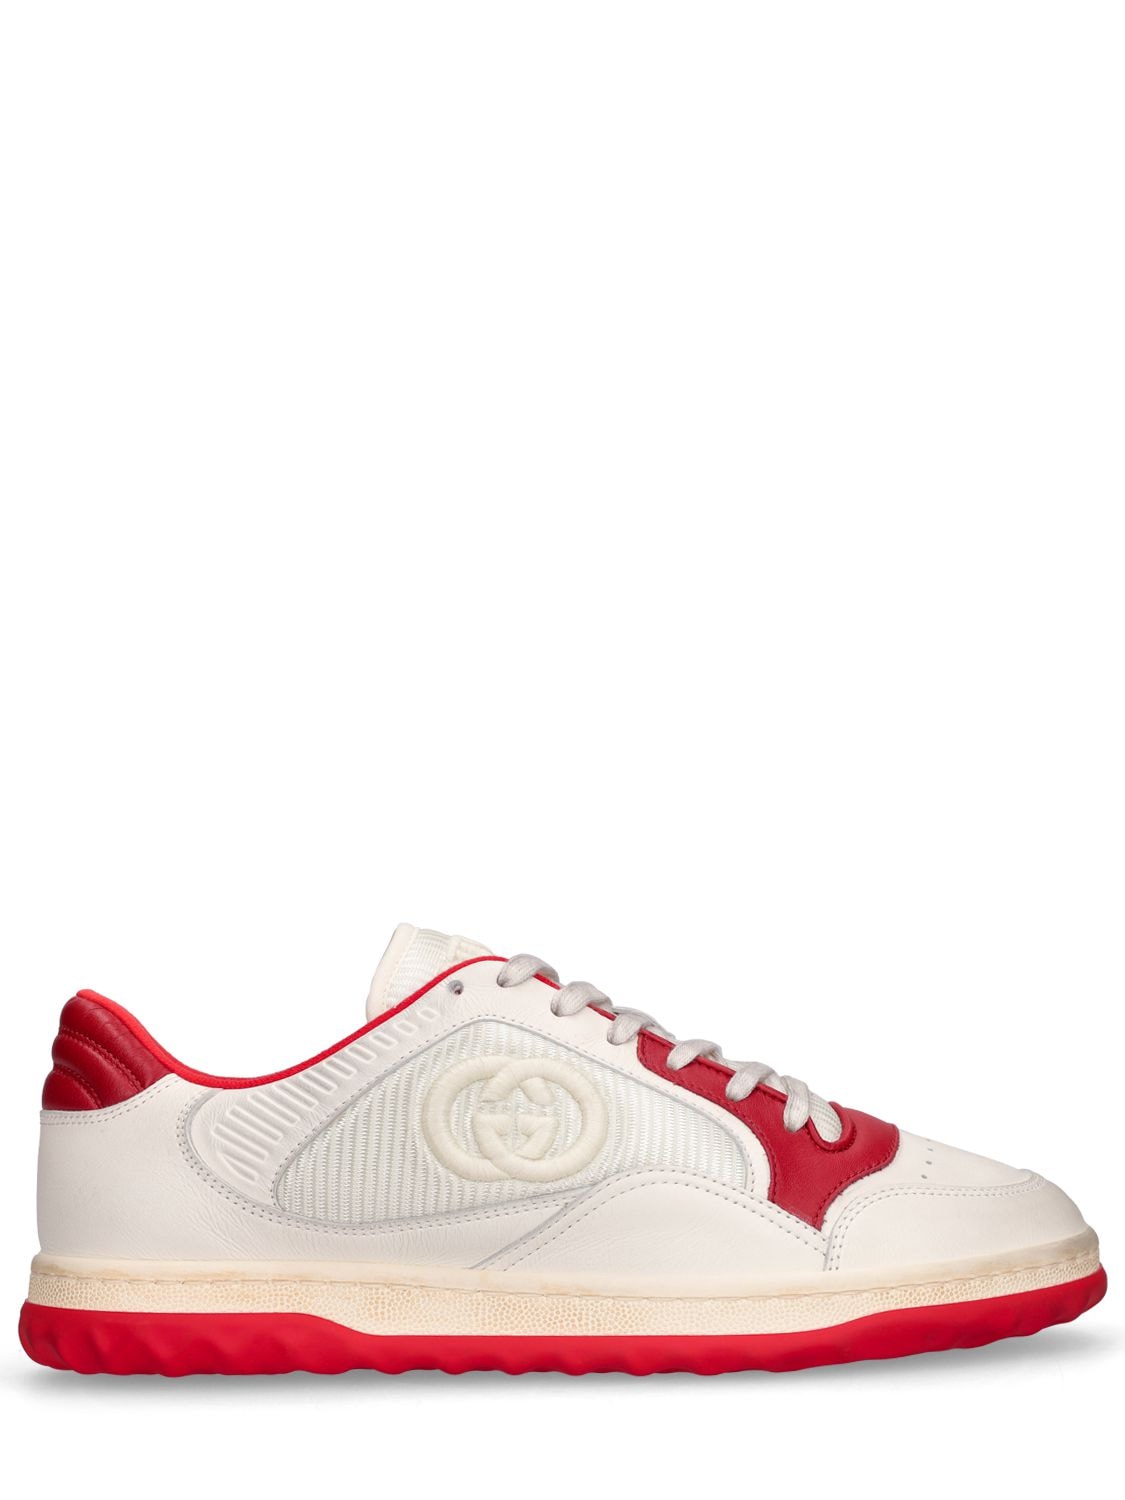 GUCCI MAC80 LEATHER SNEAKERS